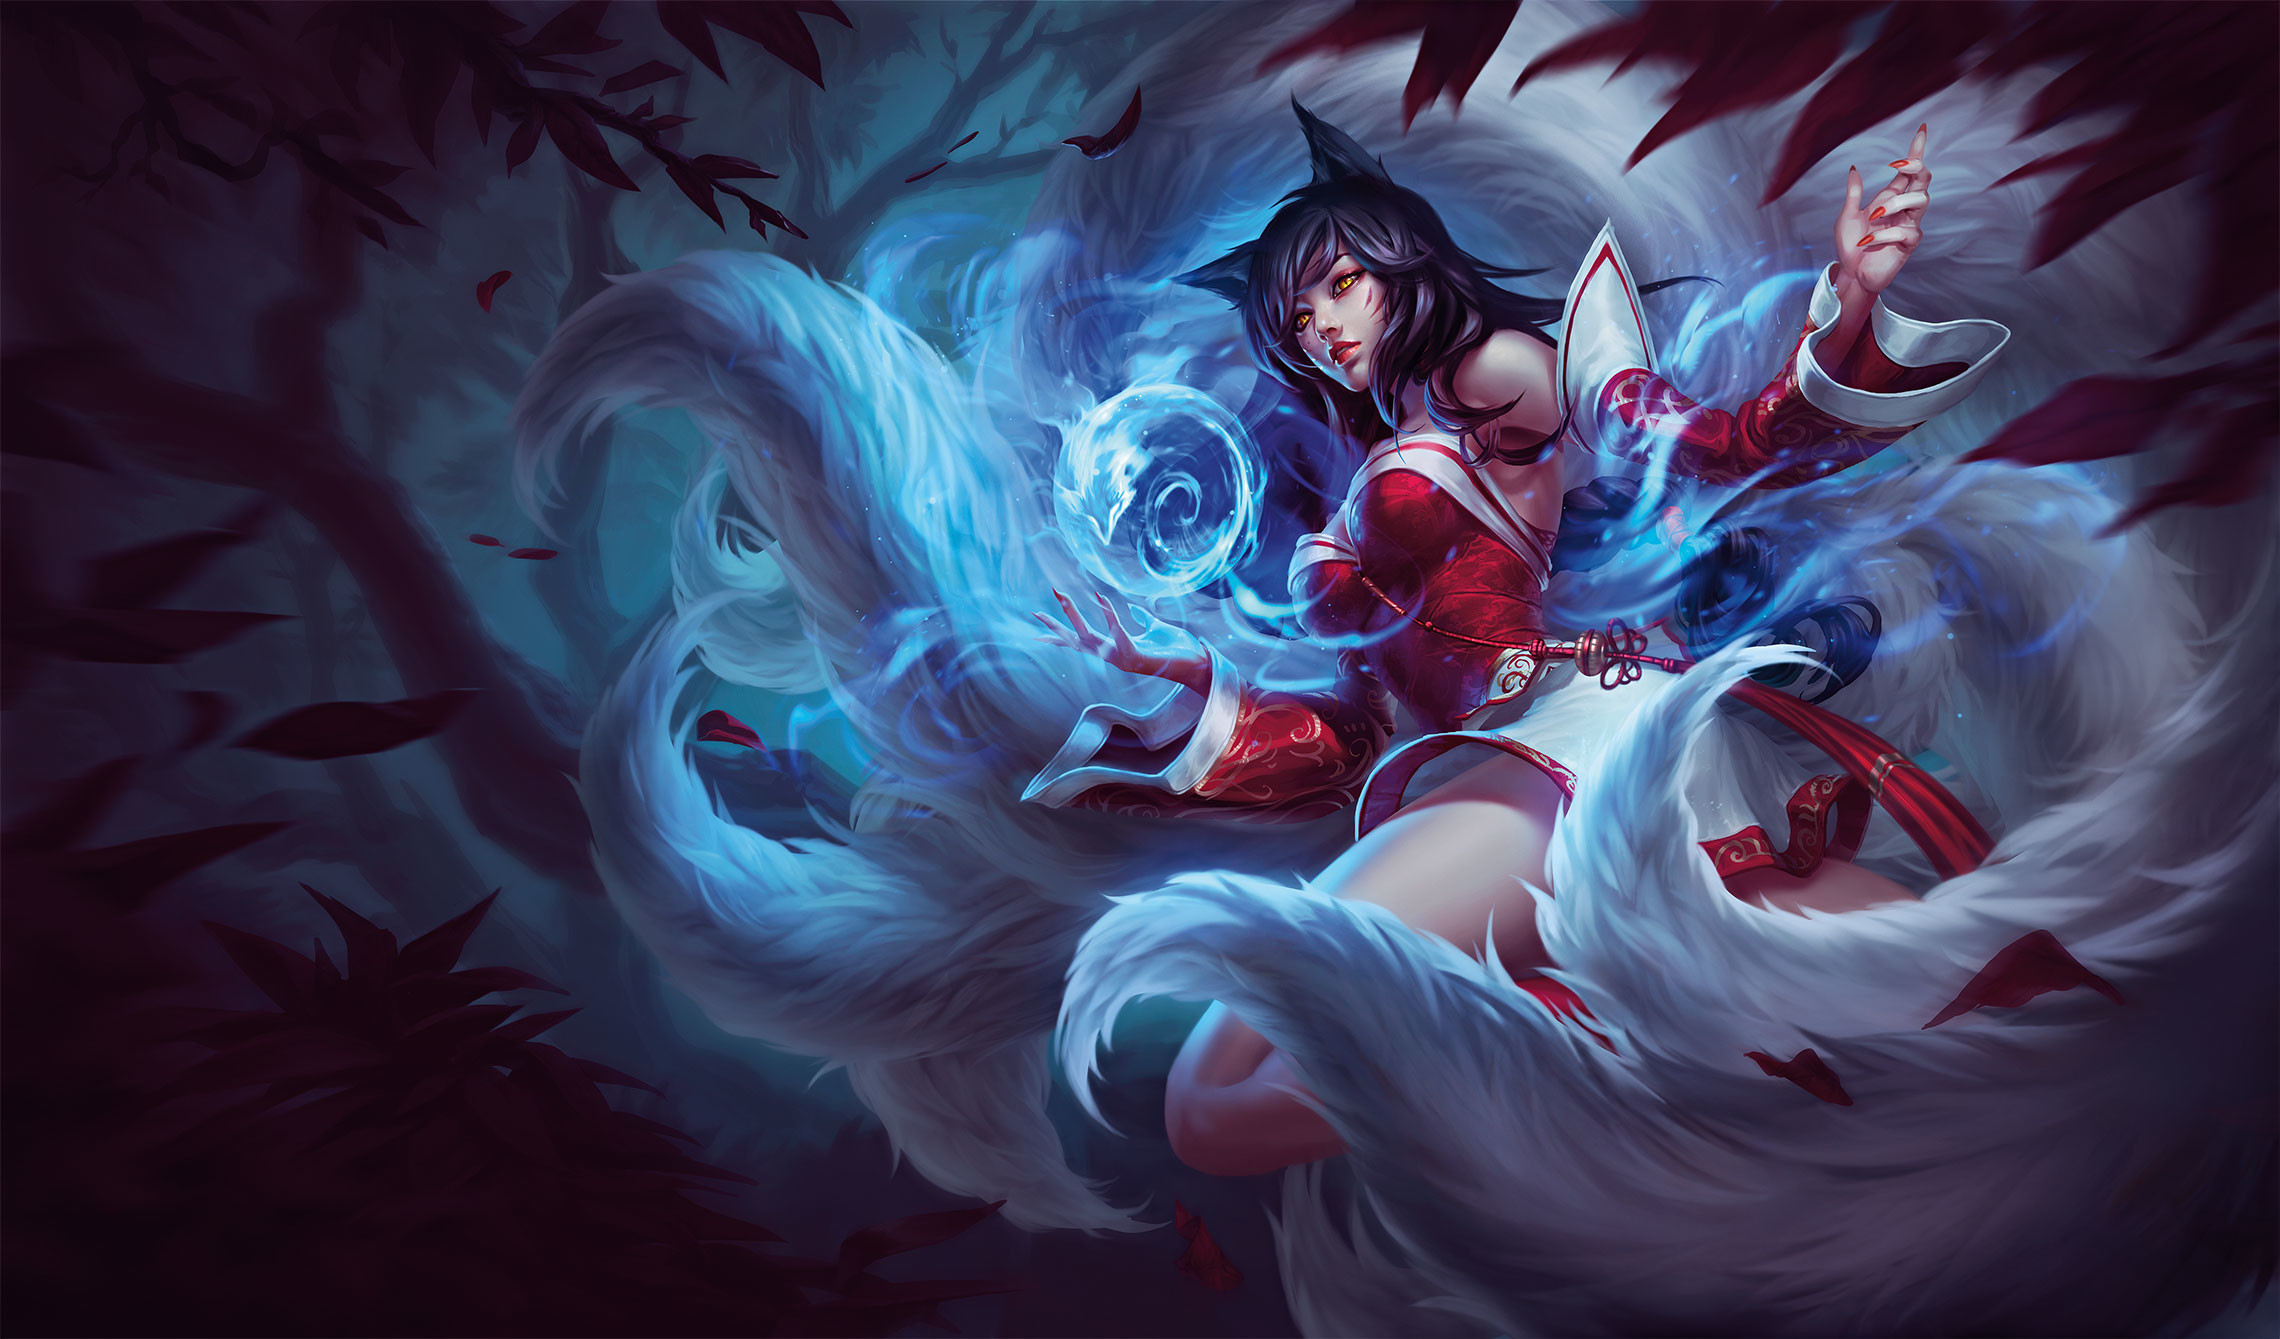 2280x1339 Ahri the nine tailed fox one of the champions from league of legends | Ahri  League of Legends | Pinterest | Fan art and Anime